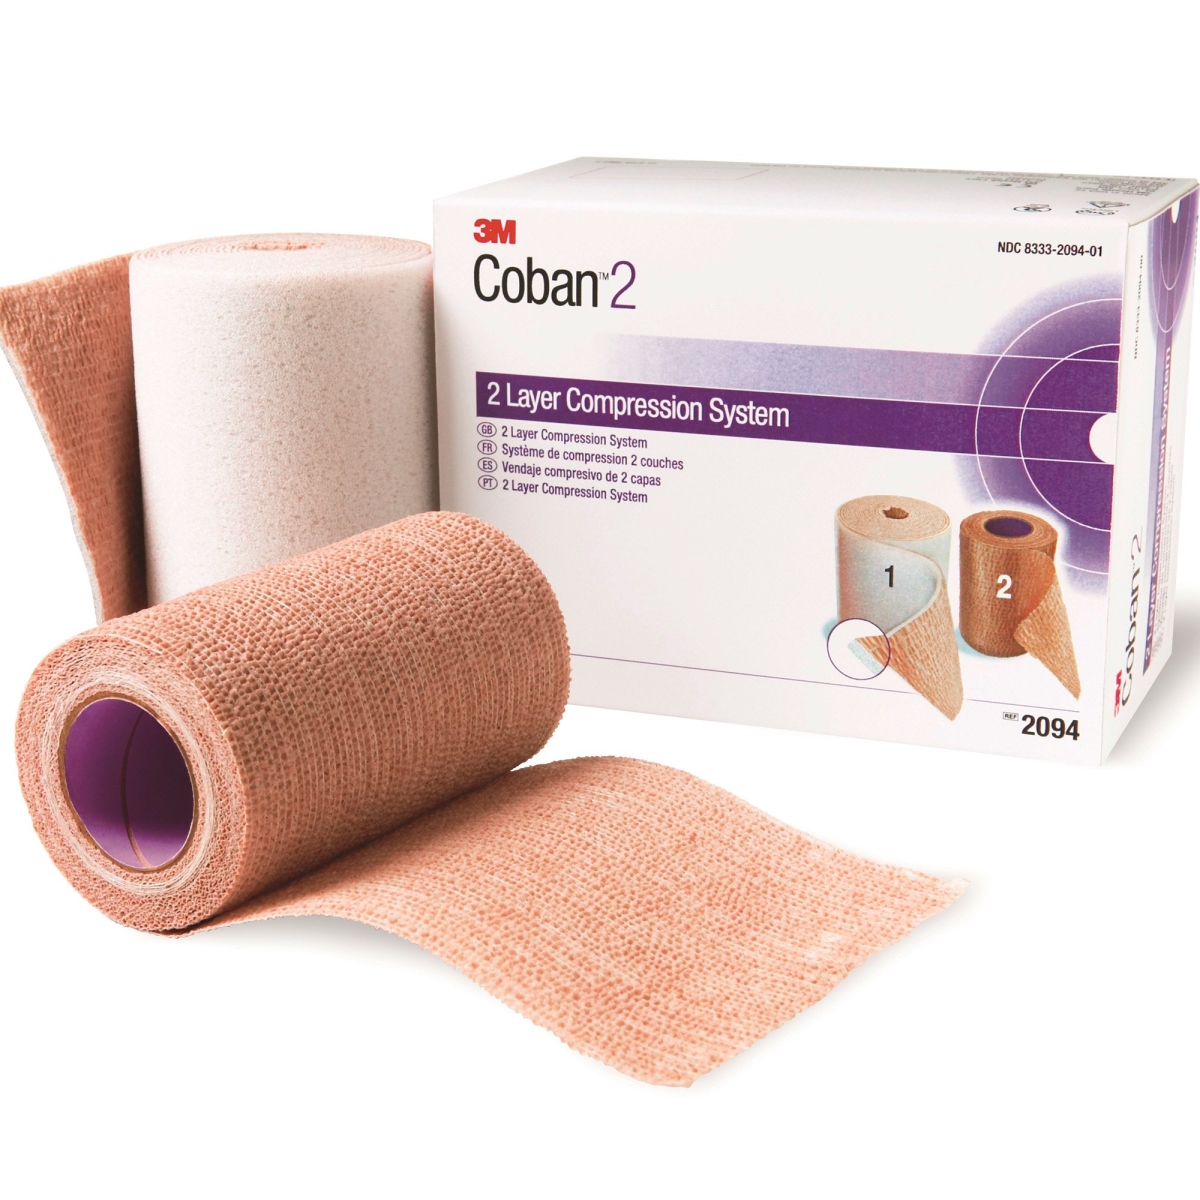 Picture of 3M 29043001 Tan & White Coban2 Nonsterile 2 Layer Compression Bandage System&#44; 2.9 yardss X 4 in.